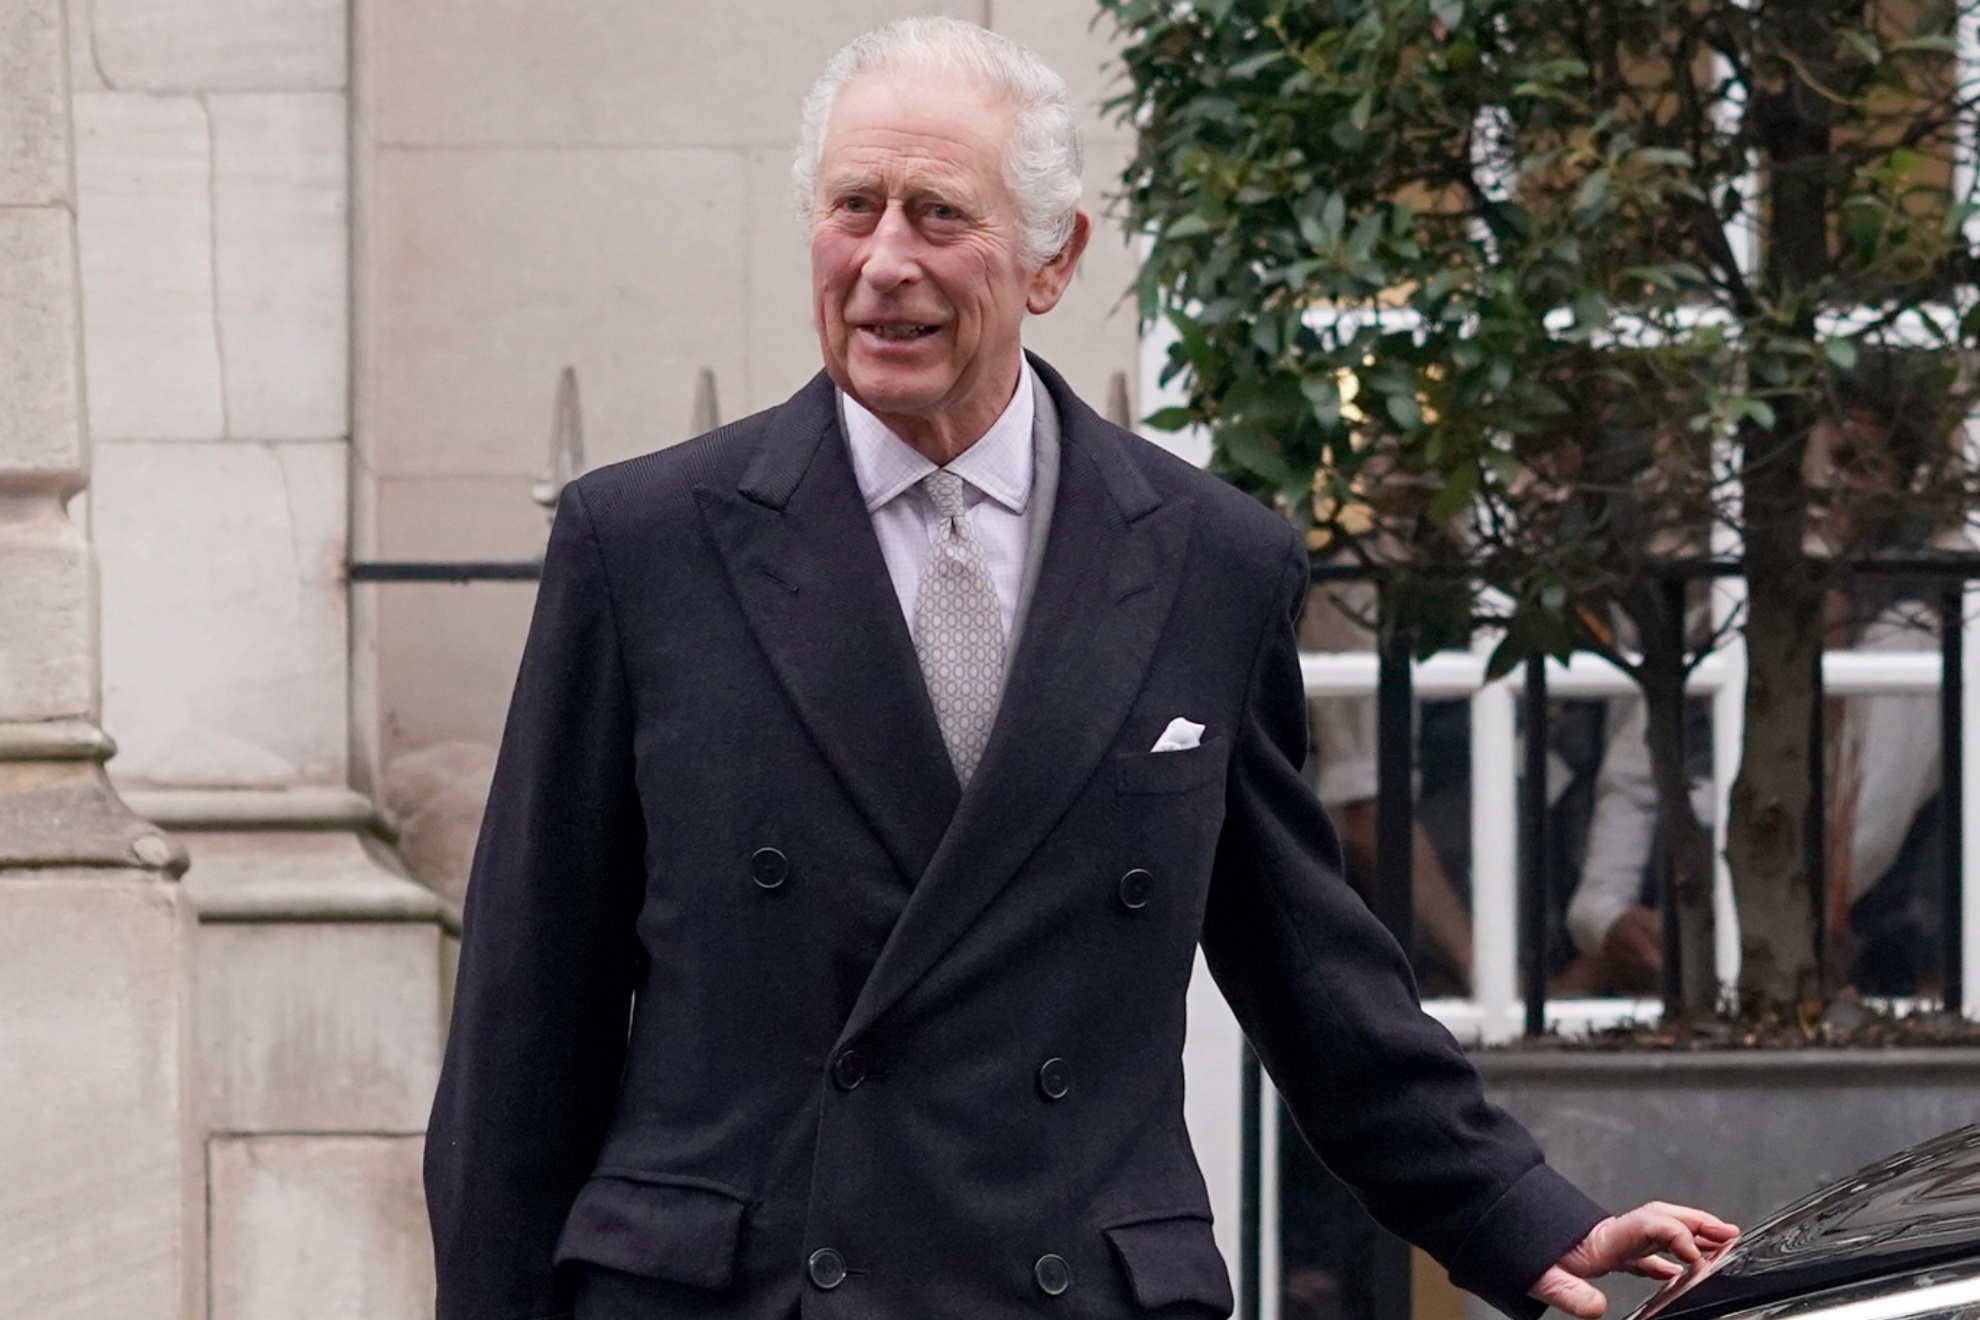 King Charles reportedly visited Kate Middleton while in the hospital in London